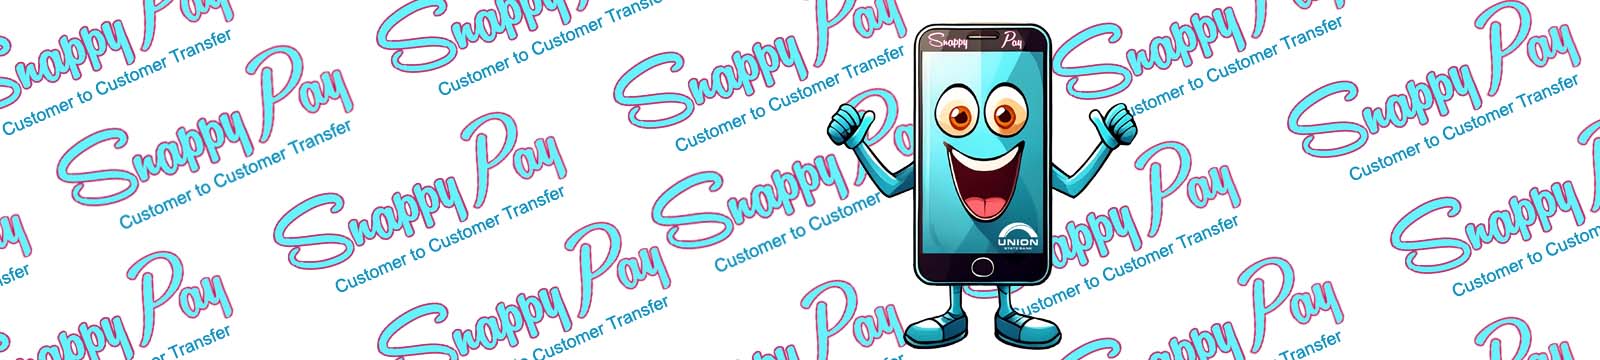 Cartoon image of a cellphone character with a face on the screen, arms and legs. Background reads Snappy Pay customer to customer transfer.